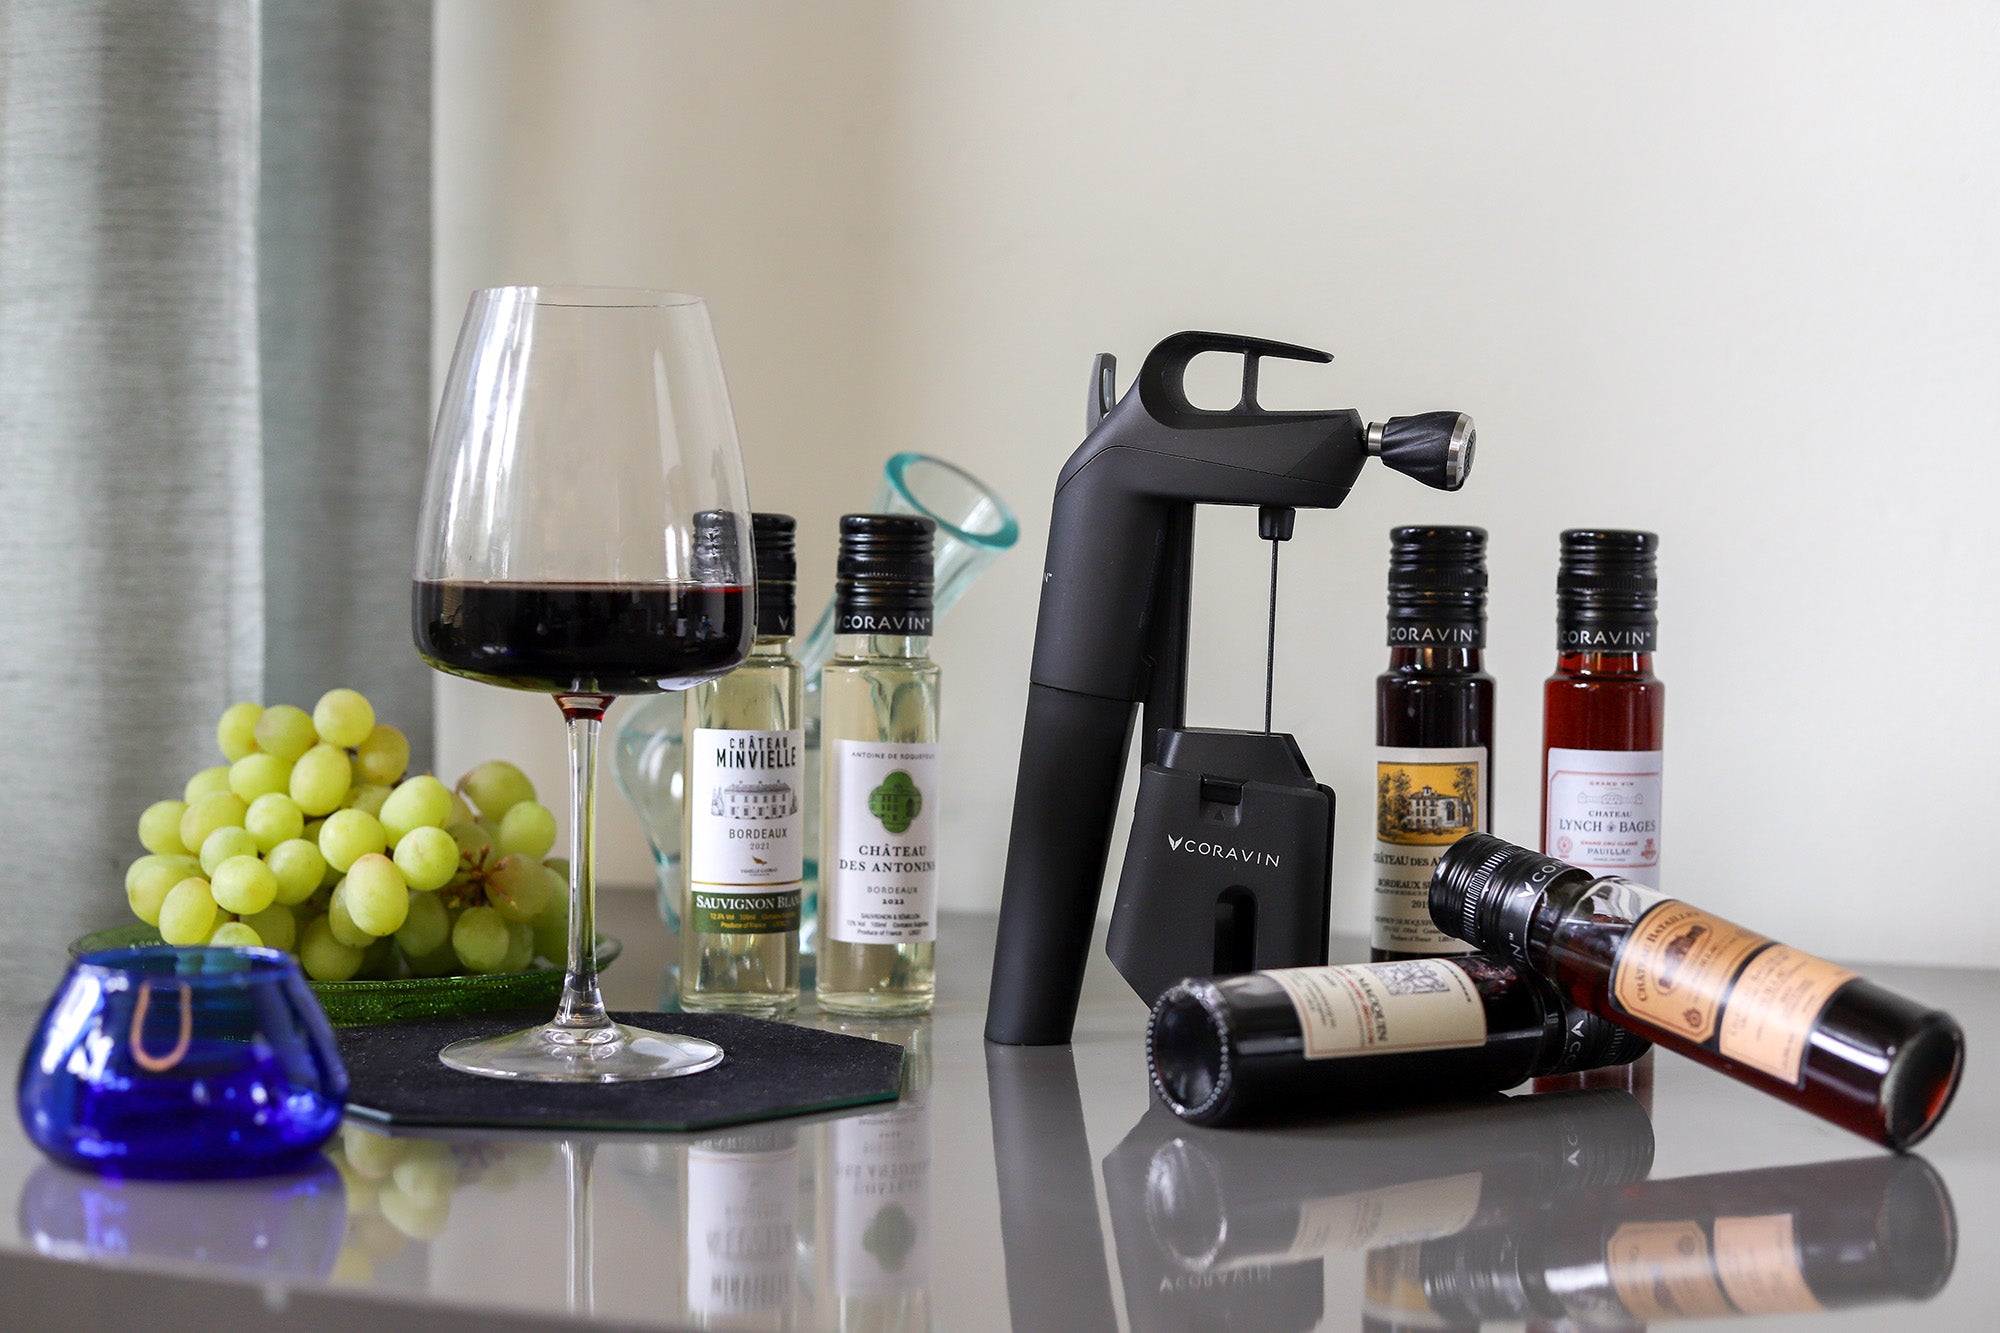 Father’s Day Special! Buy a Timeless Three+ and get a £99 Bordeaux Wine Kit for free!